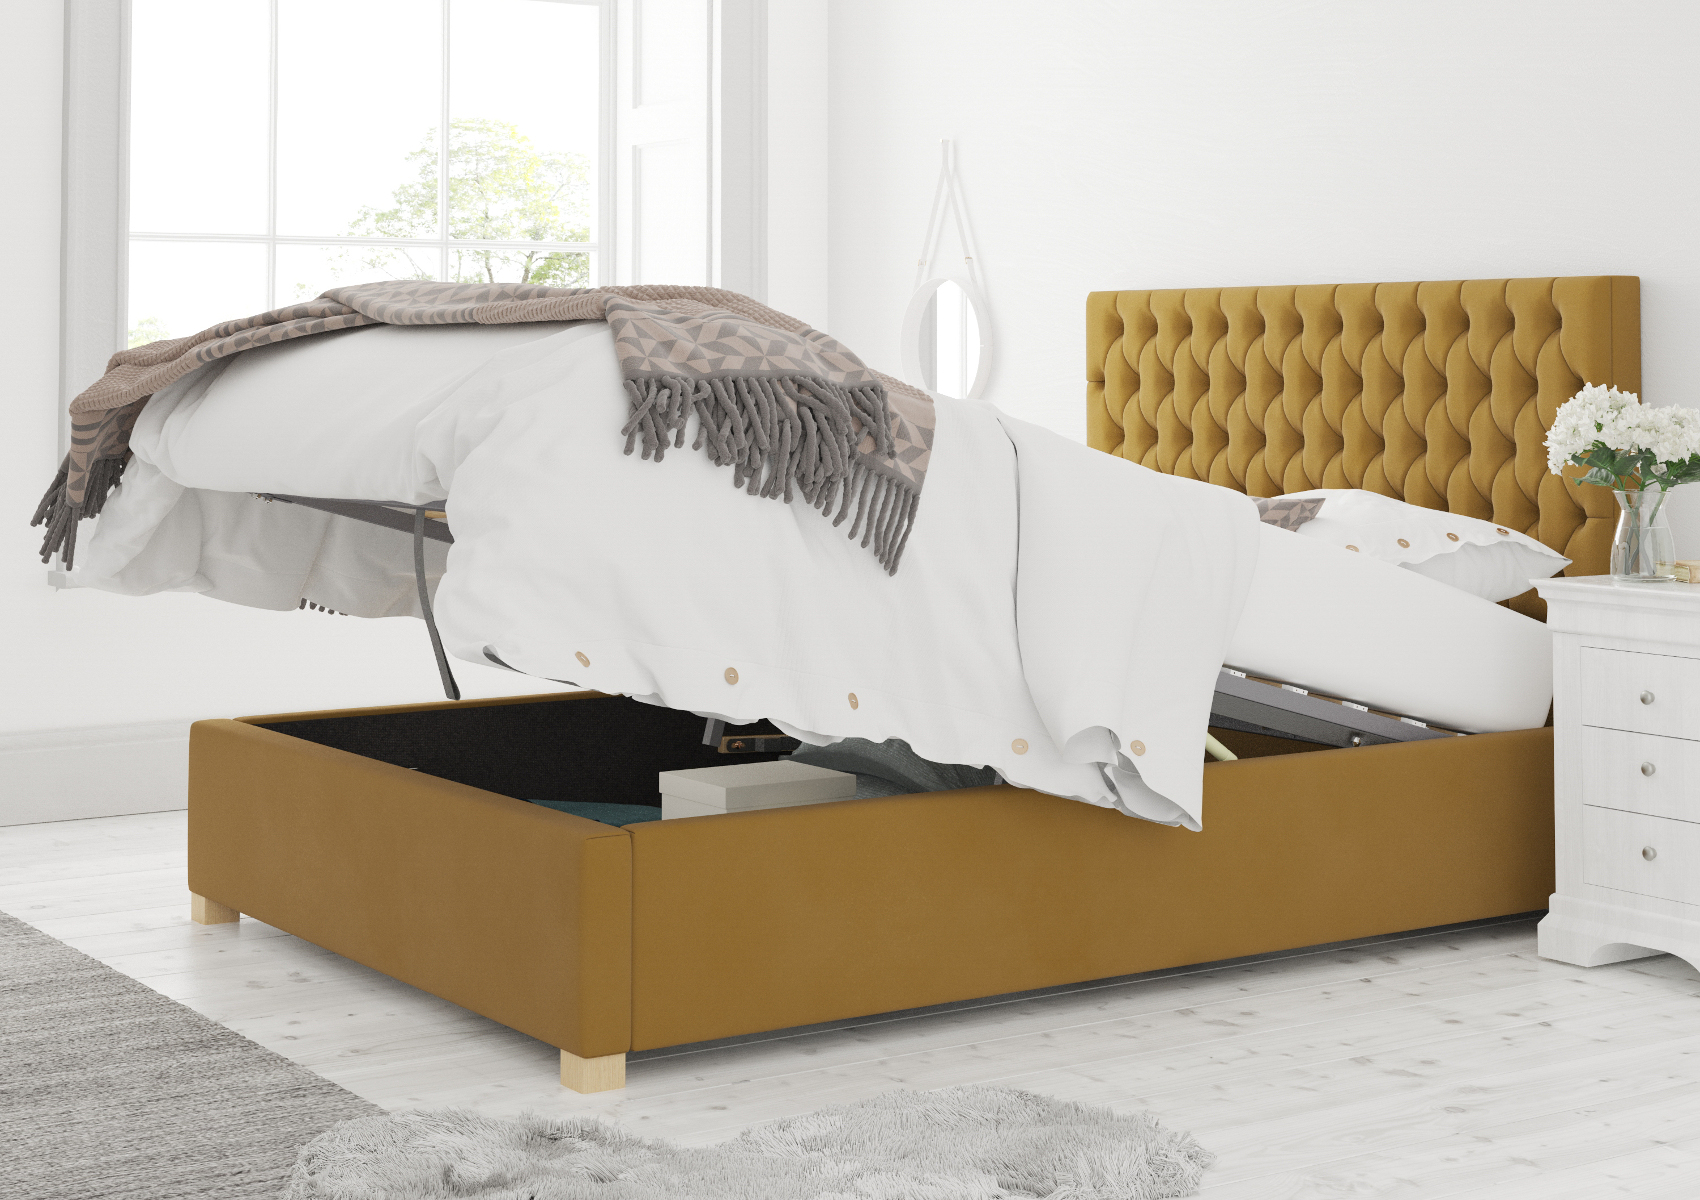 View Malton Ochre Upholstered Double Ottoman Bed Time4Sleep information